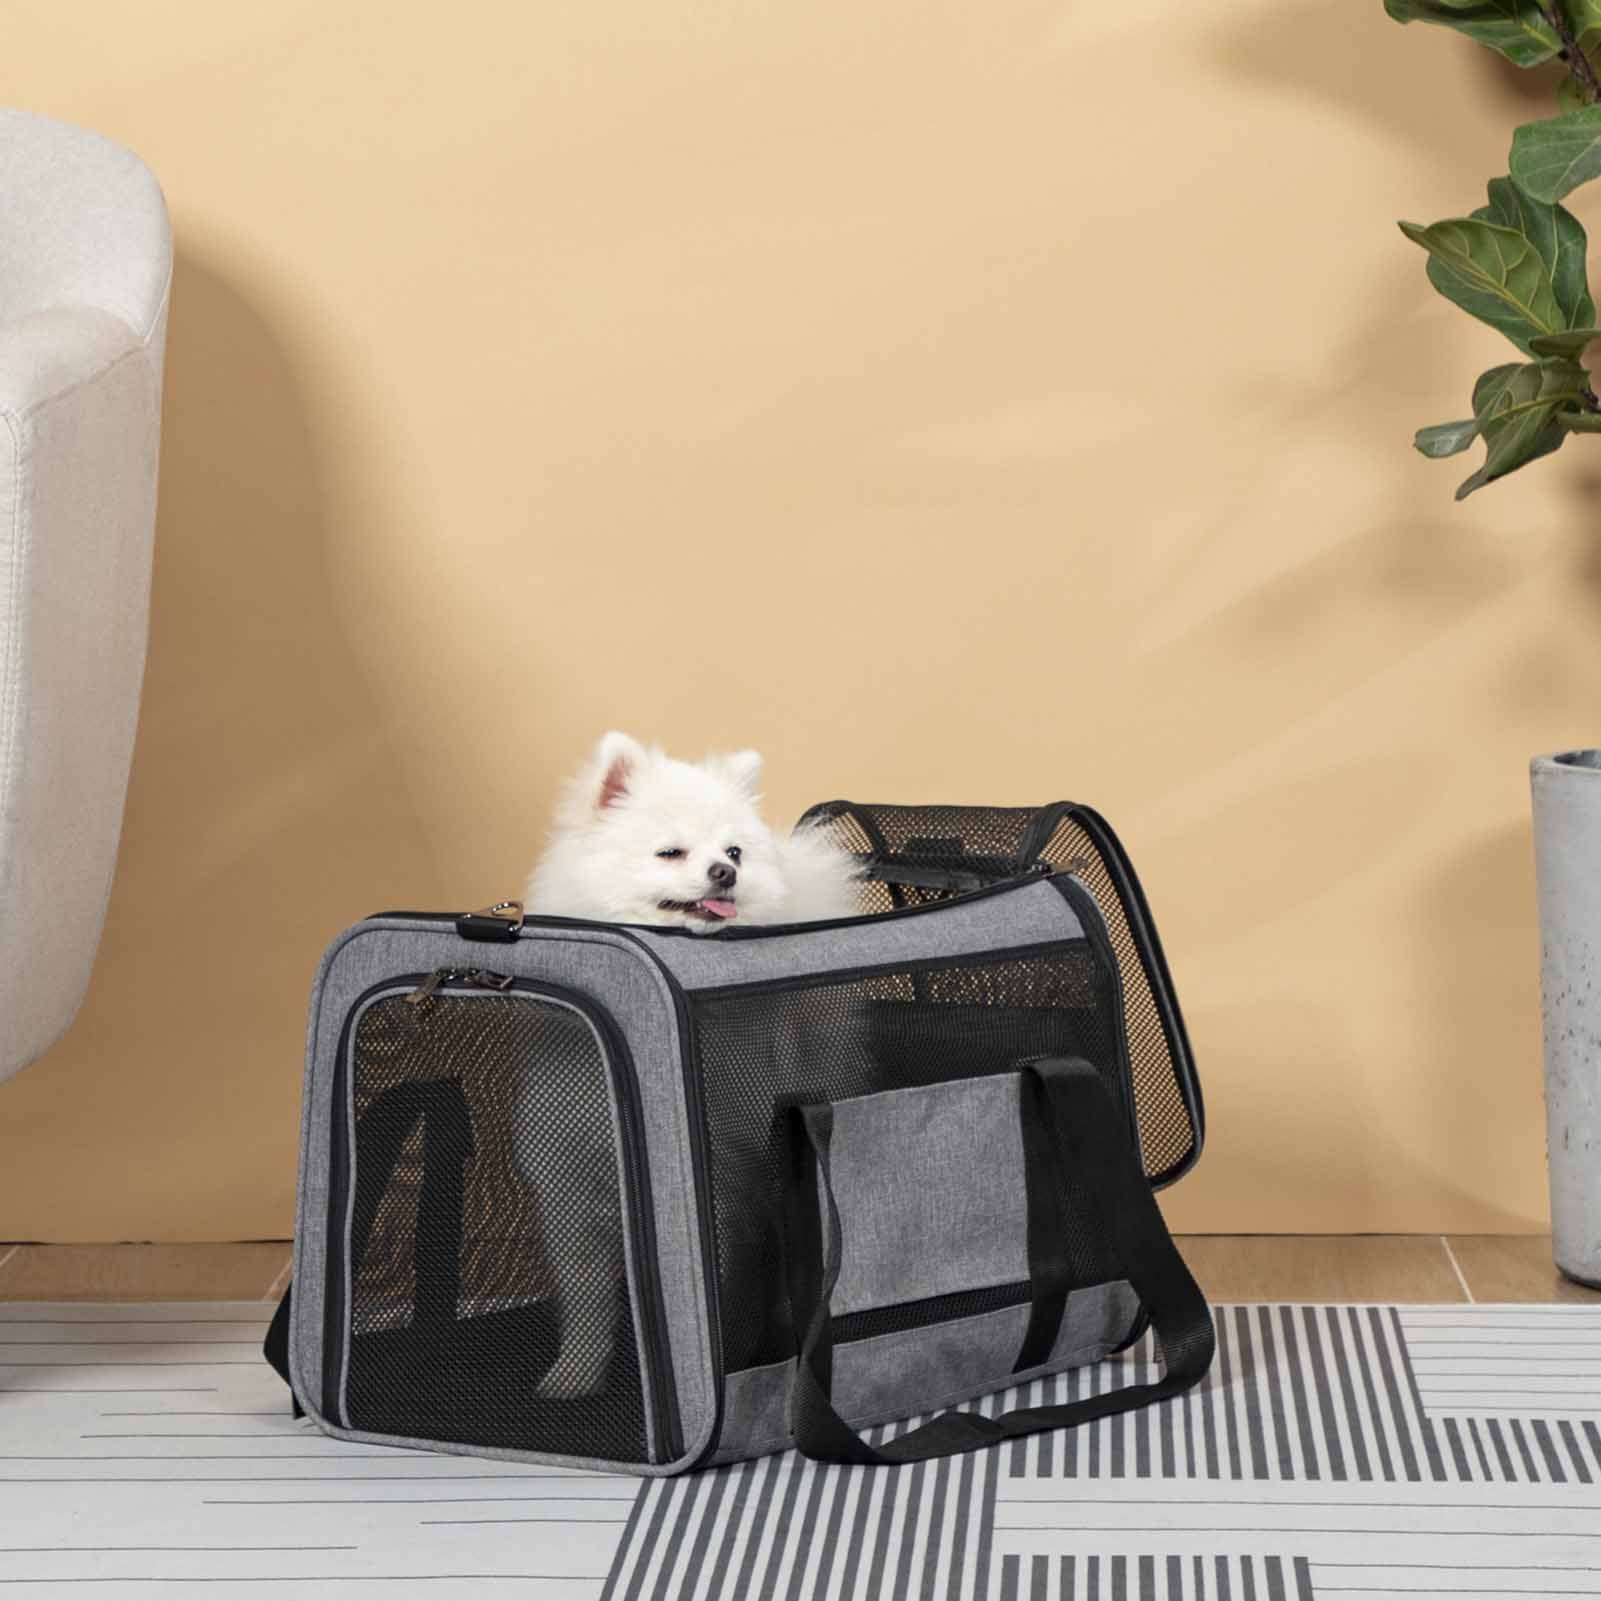 Frisco Soft Double Sided Expandable Airline Approved Dog & Cat Carrier